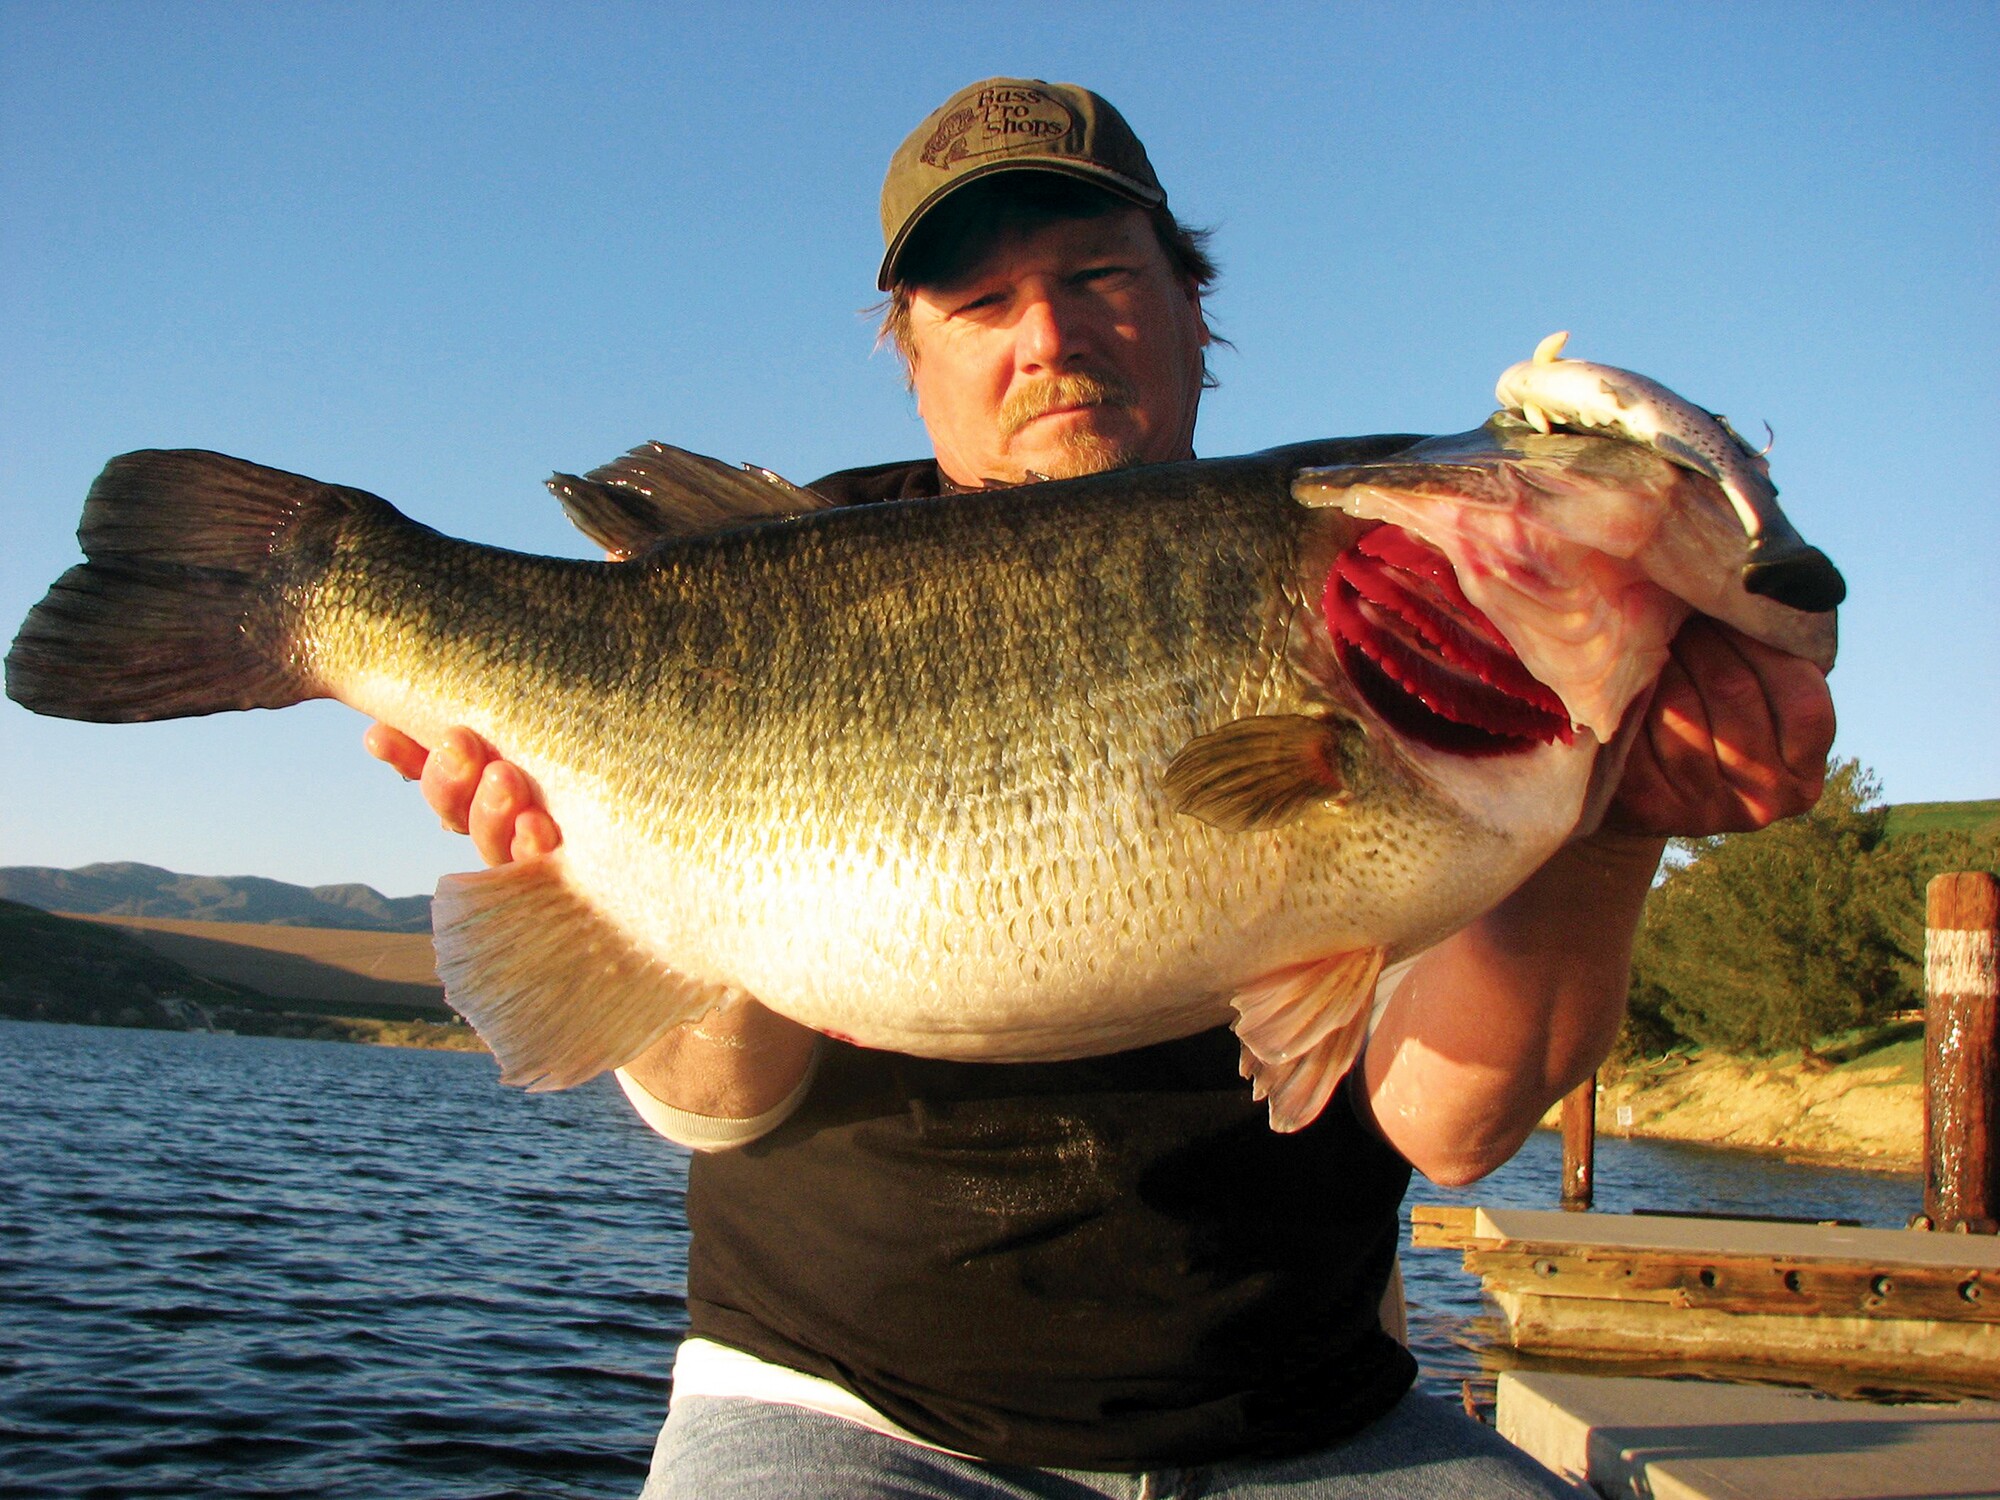 Butch Brown holds his personal best largemouth bass weighing 19.3 pounds. Caught at Castaic Lake Lagoon 